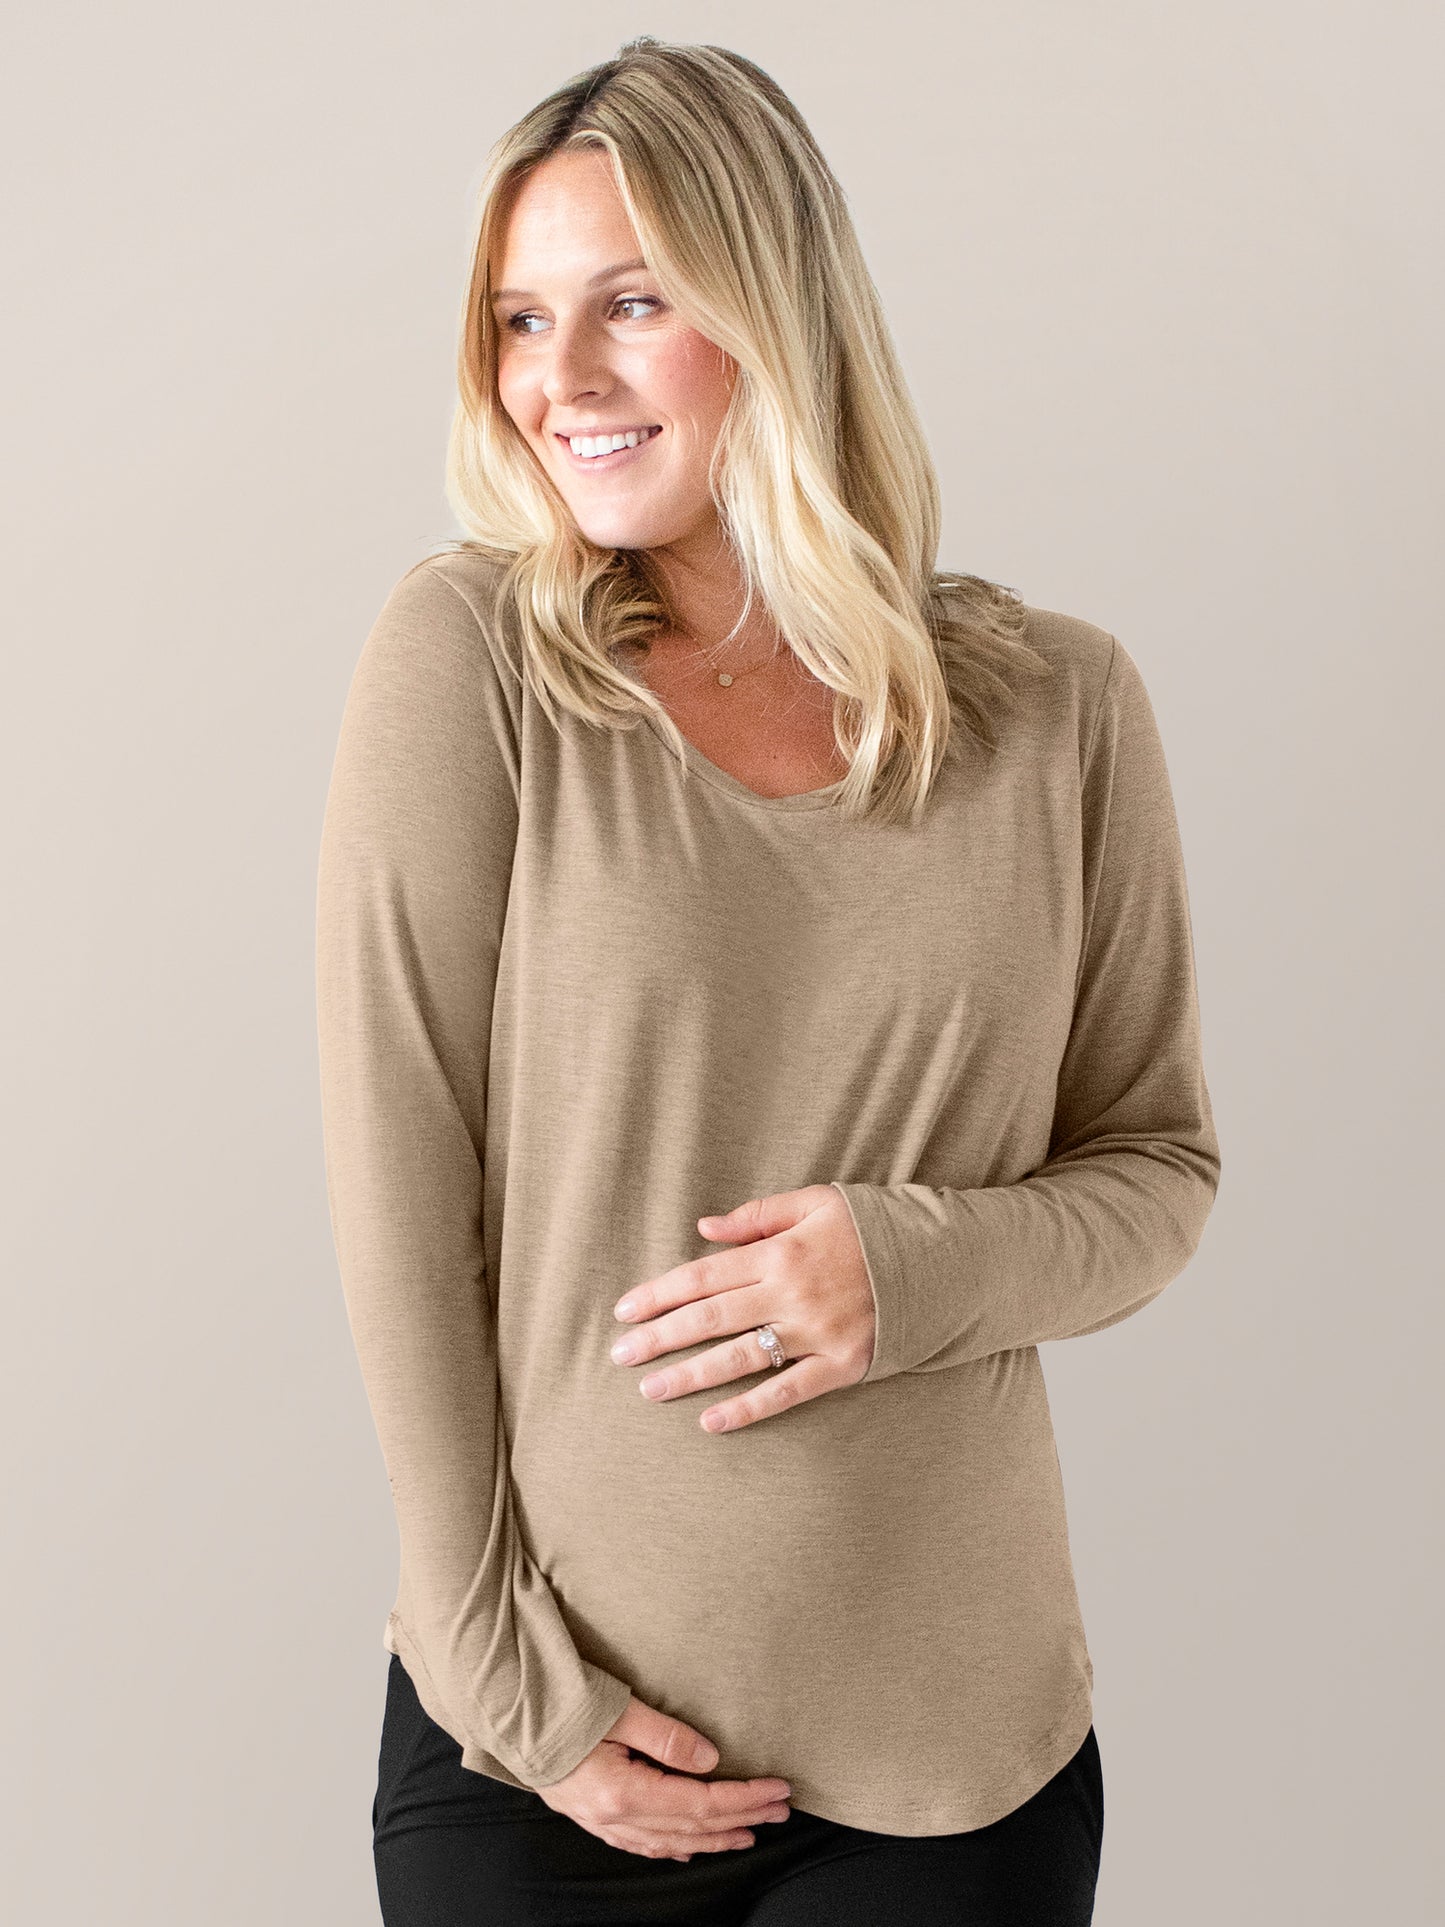 Pregnant model wearing the Bamboo Maternity & Nursing Long Sleeve T-shirt in Wheat with her hands on her stomach. @model_info:Maddy is wearing a Small.